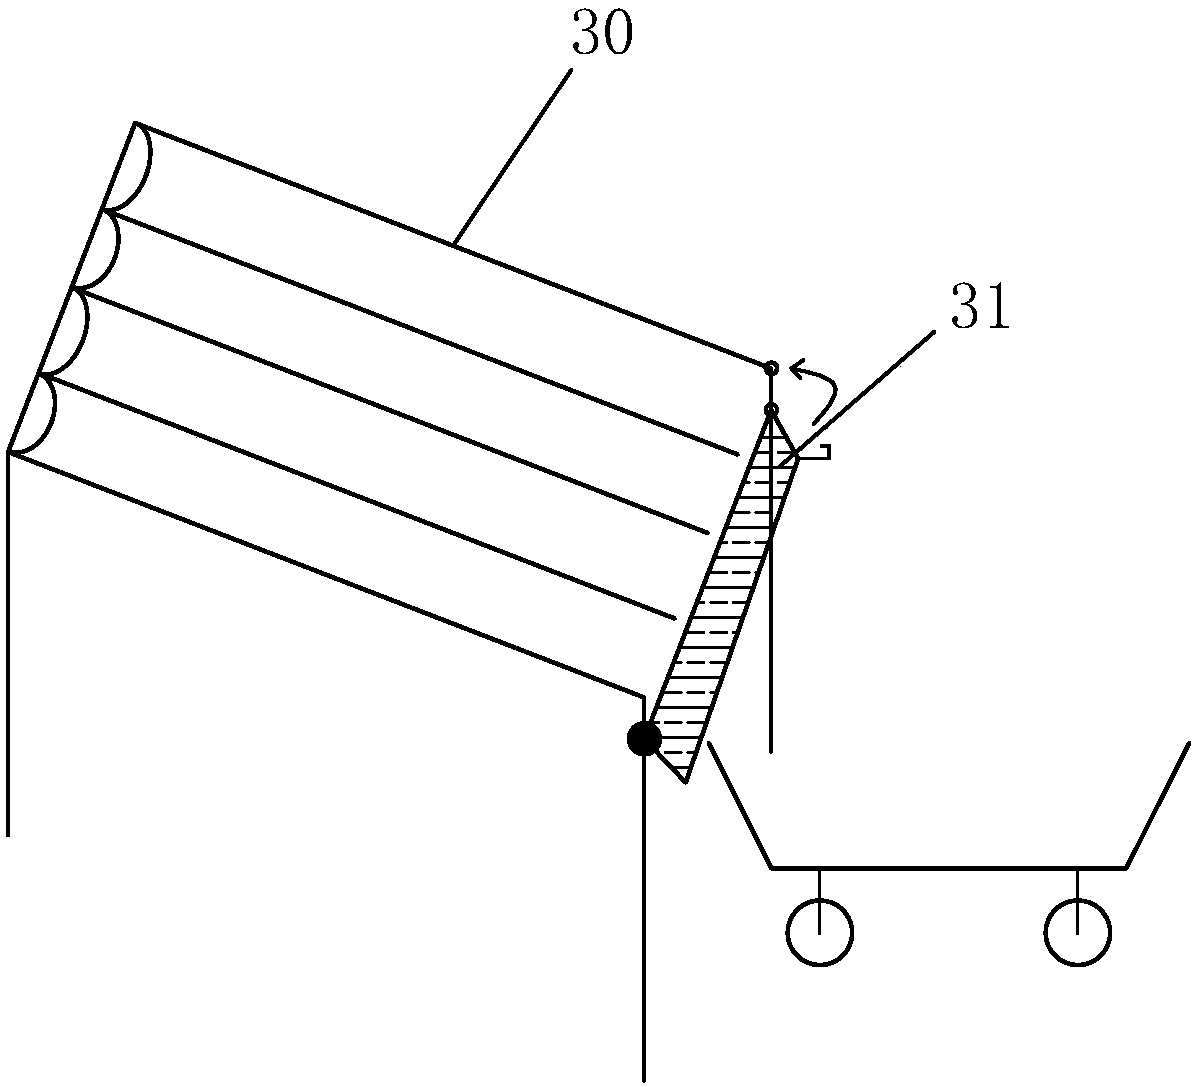 Mining dust collection device and method